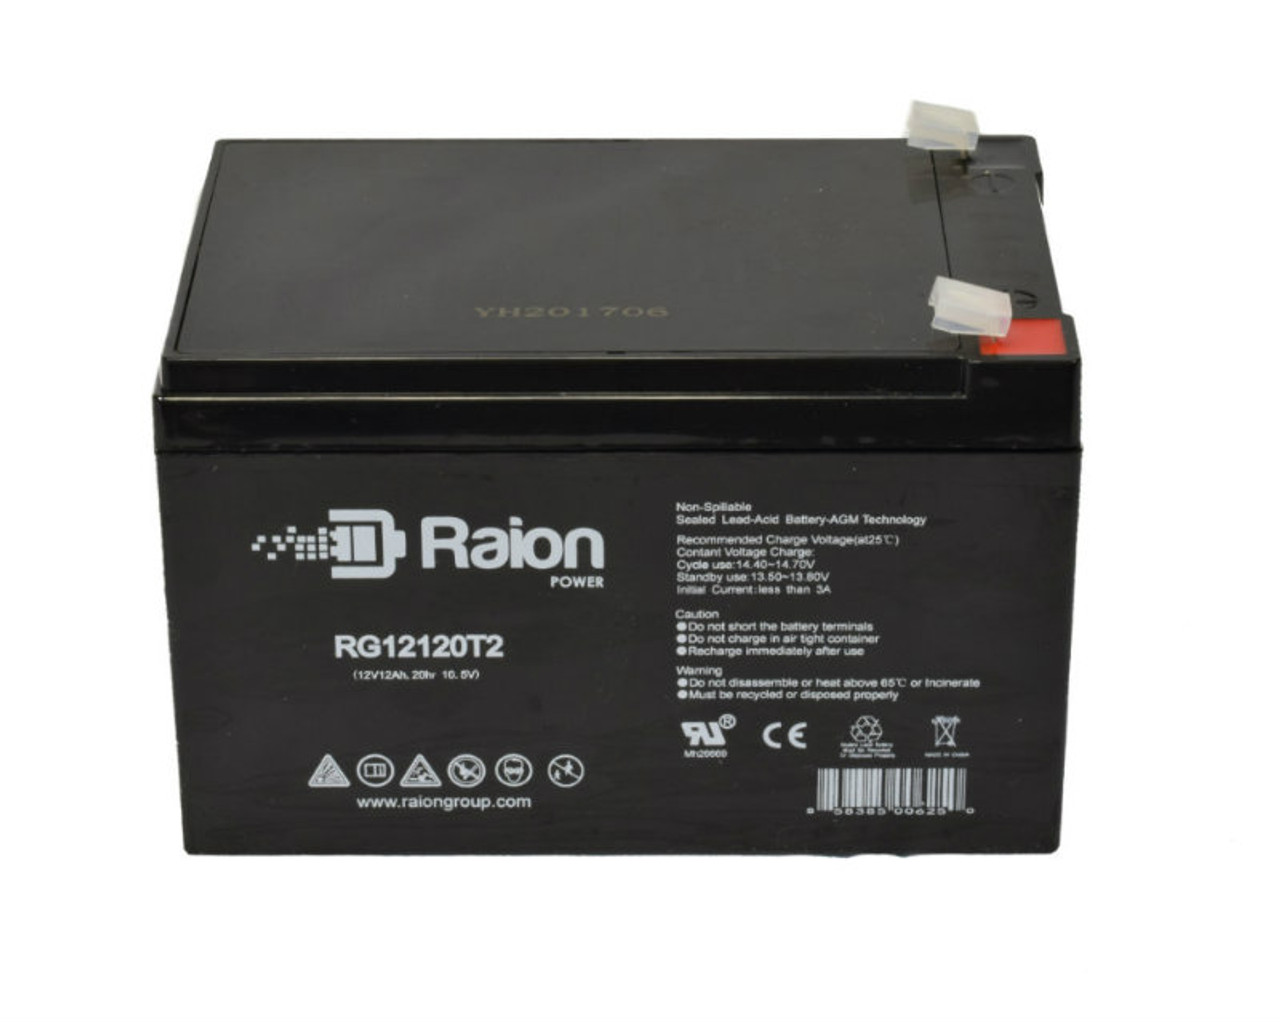 Raion Power RG12120T2 SLA Battery for Uber Scoot 1600W Electric Scooter